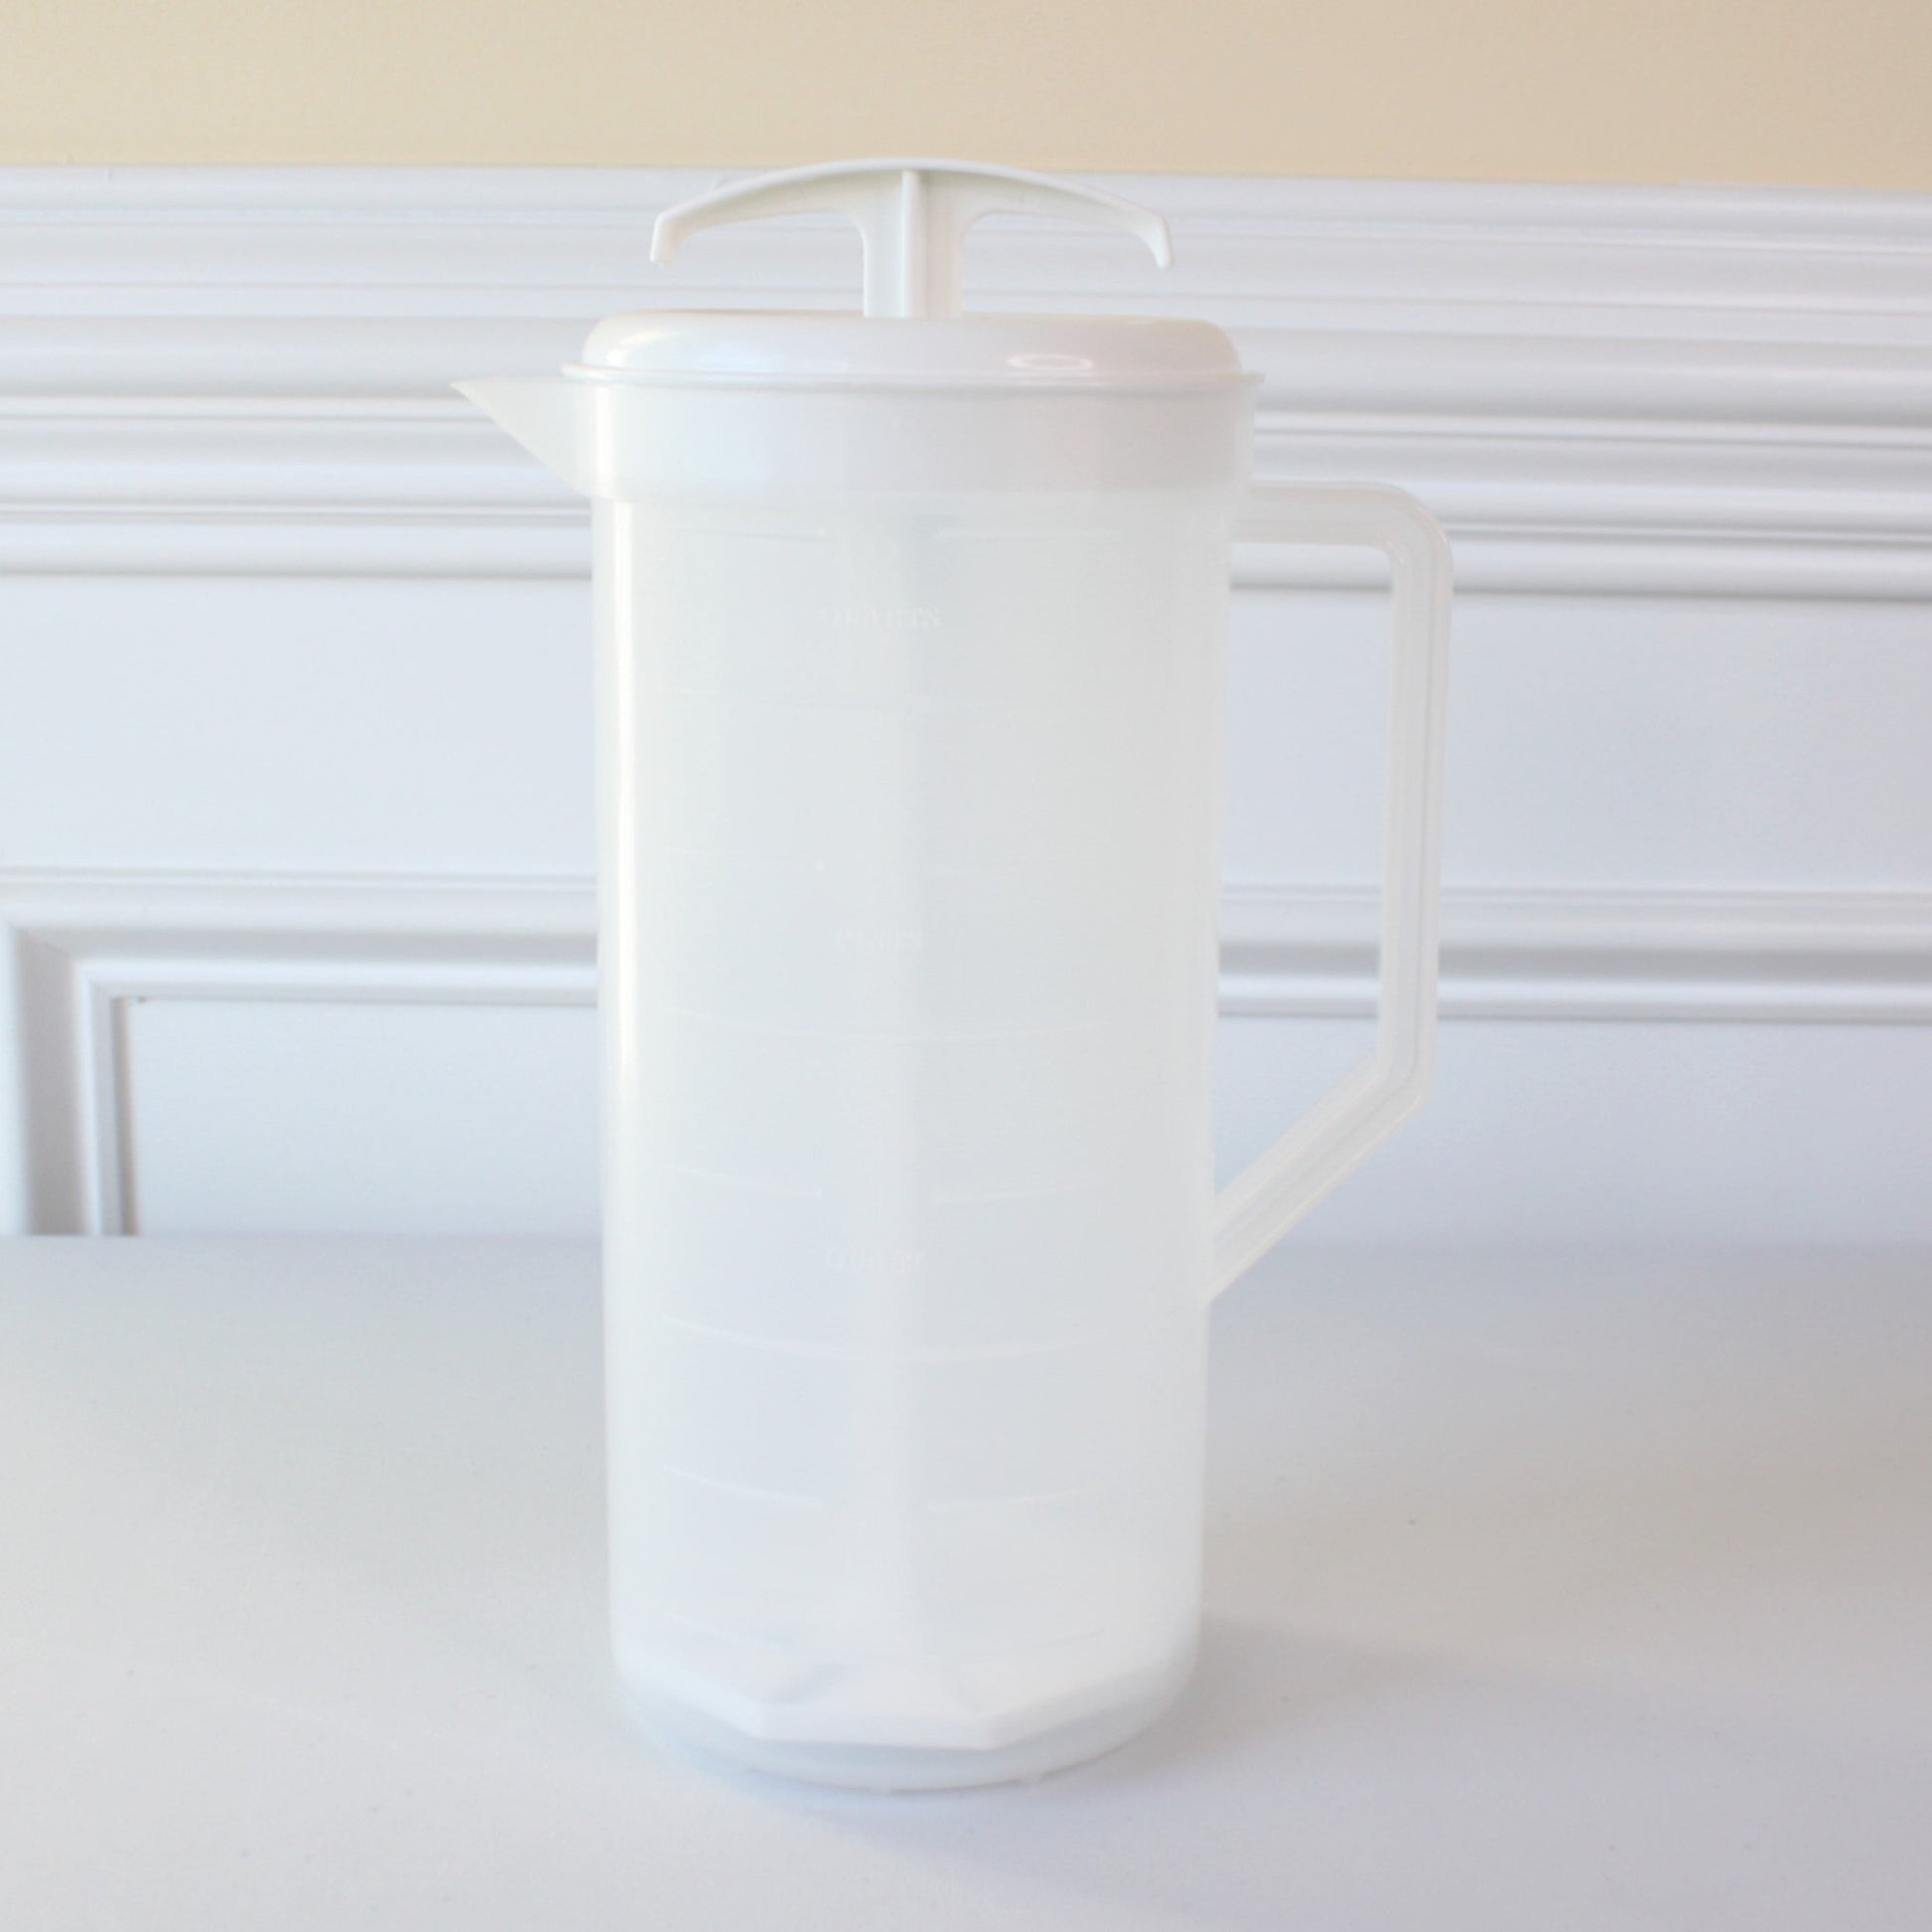 Mixing Pitcher - 2 Quart - Made in the USA